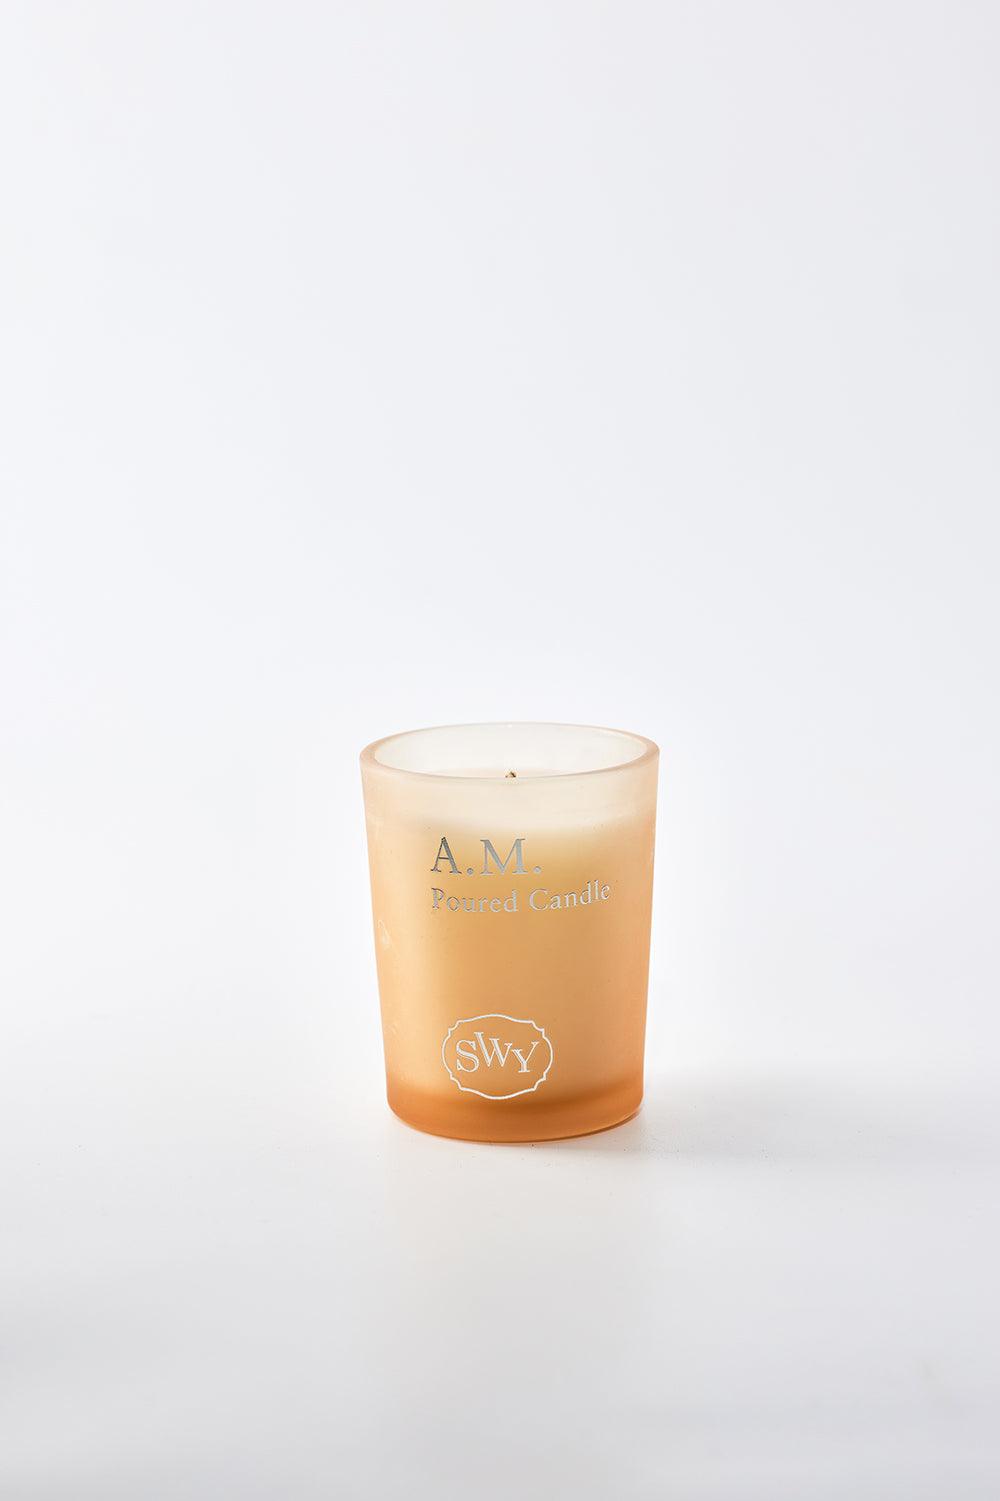 Poured Candle – A.M. - SWY - Scent With You